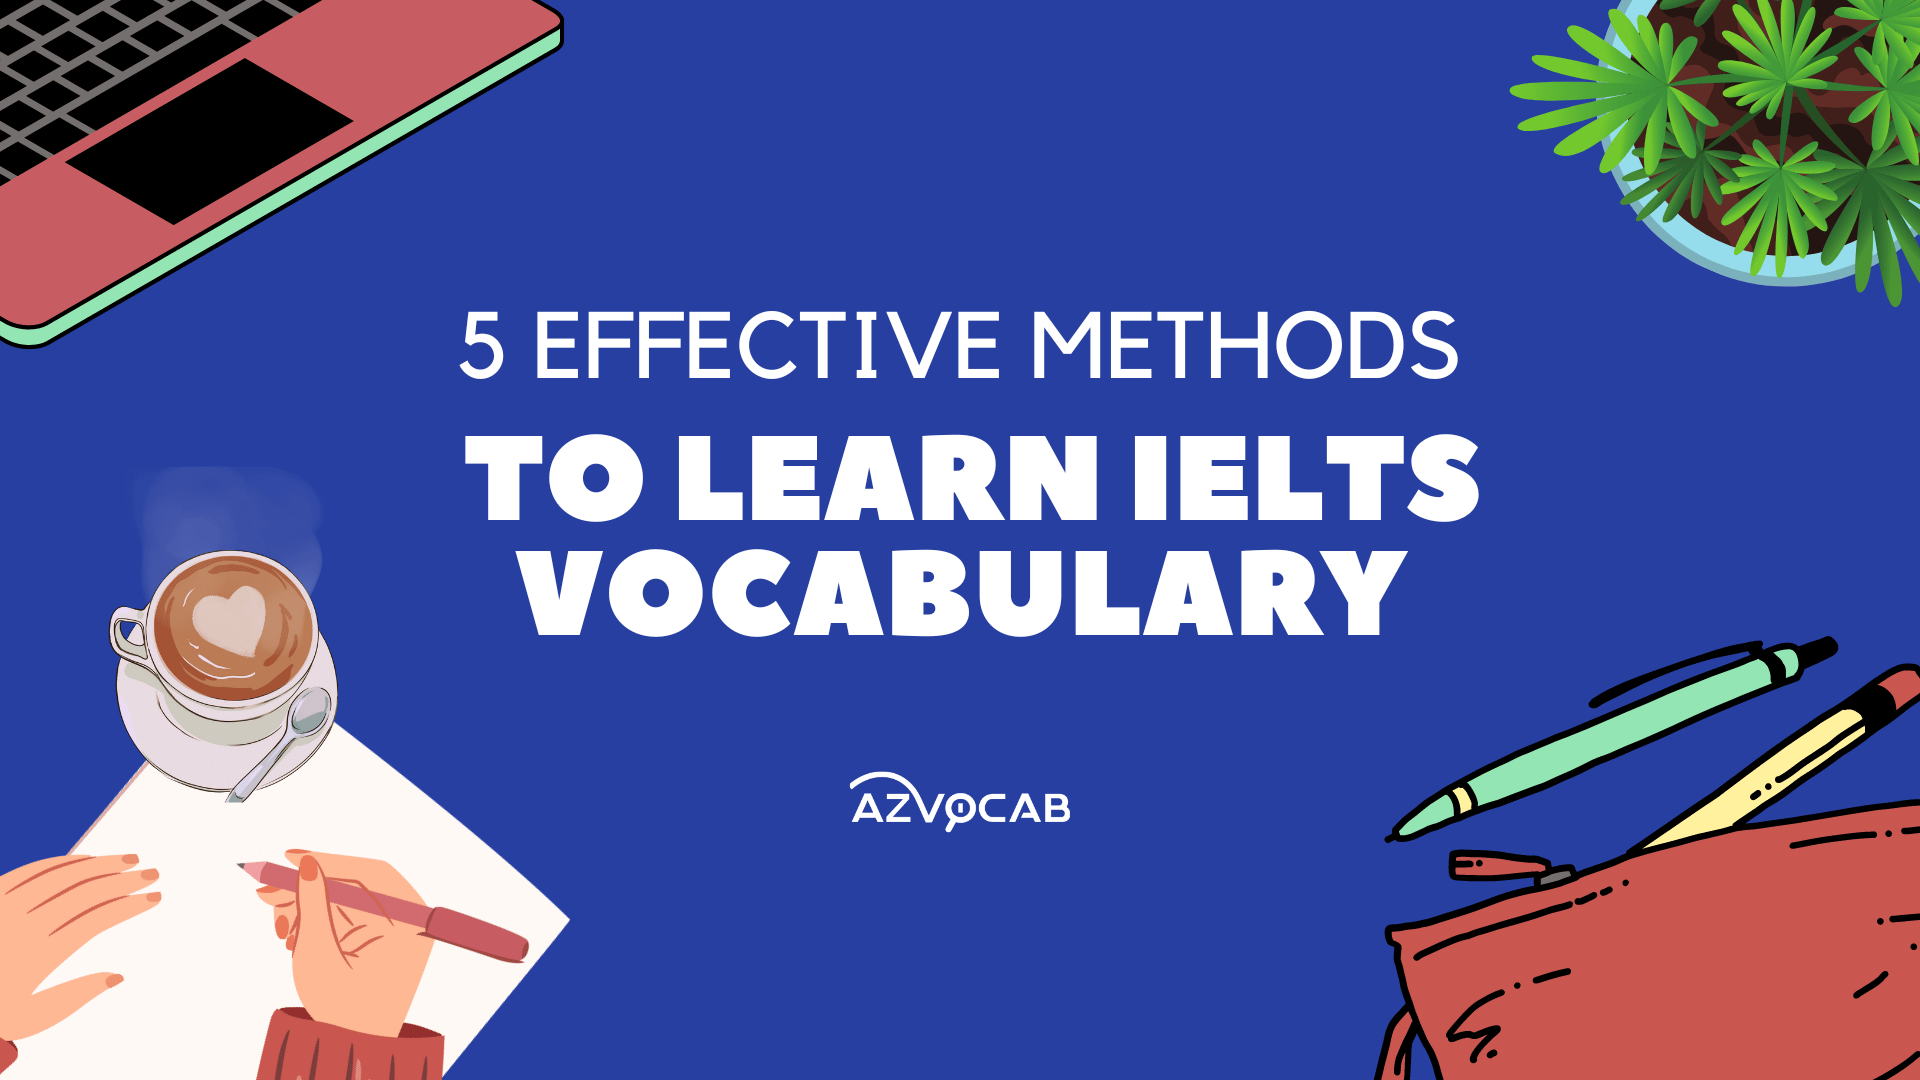 Effective methods to learn IELTS Vocabulary